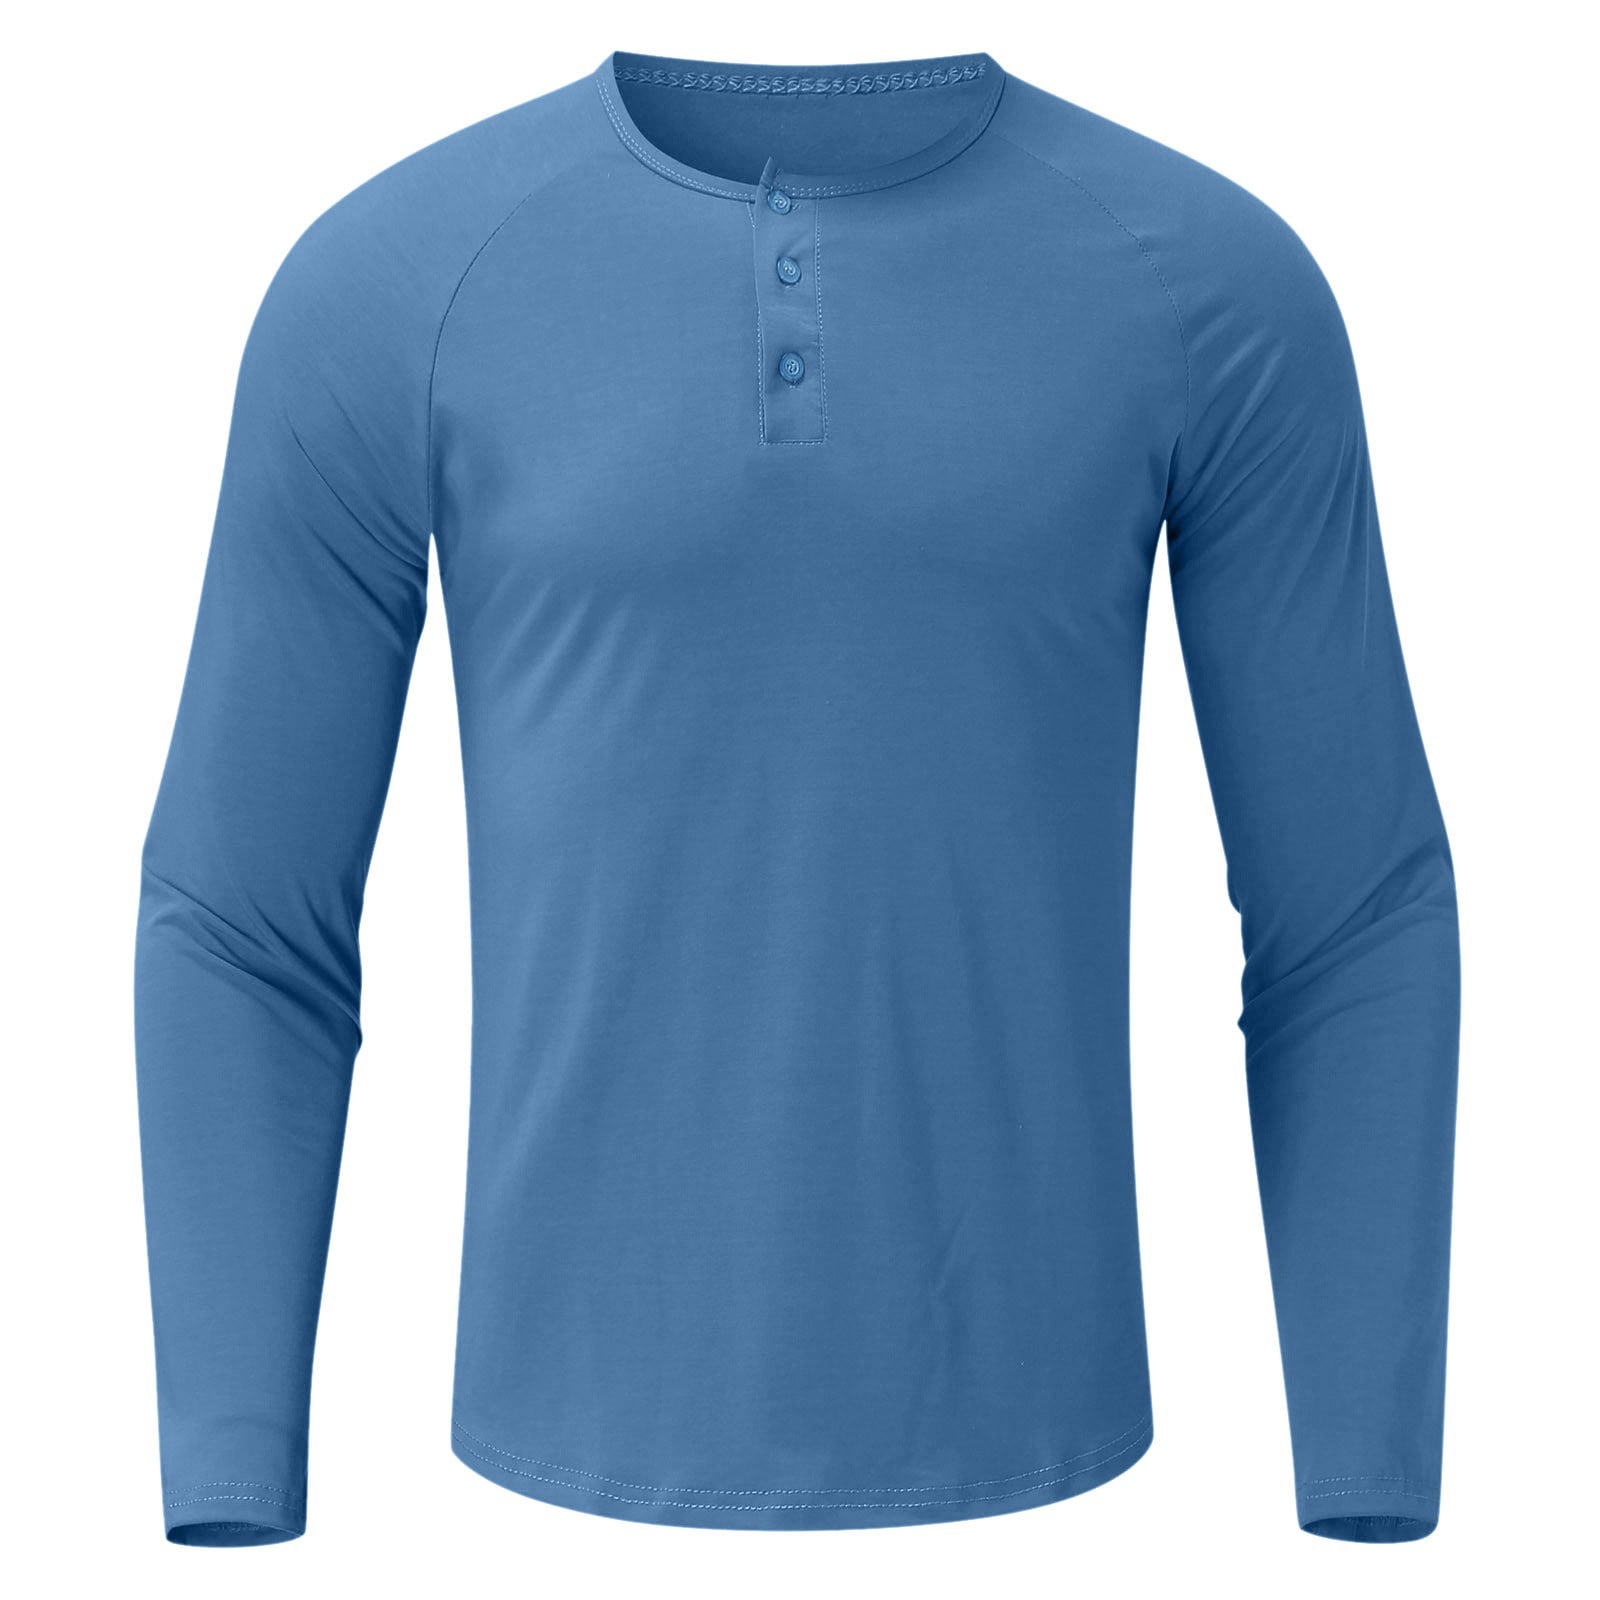 KaLI_store Polo T Shirts For Men,Men's Non-Typical Long Sleeve T